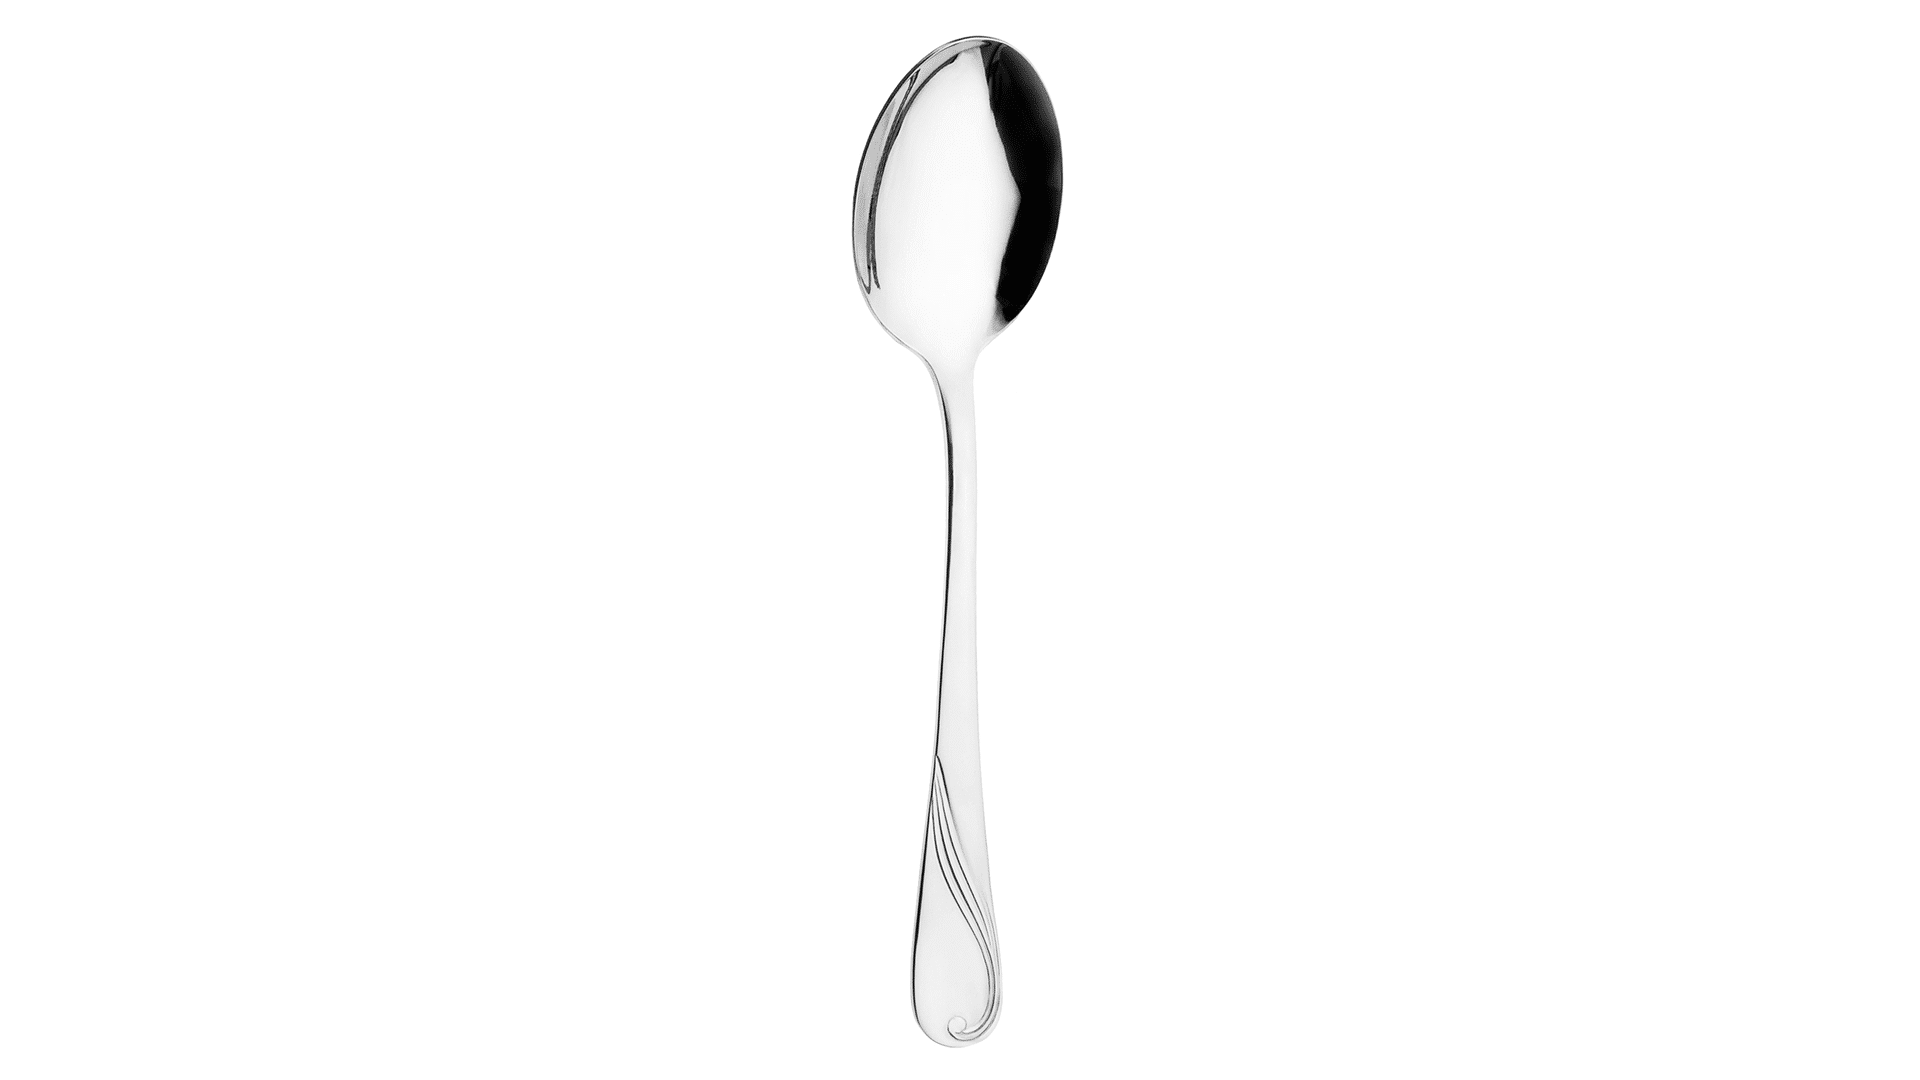 gehring-dinner-spoon-dinner-set-dolce-30-pcs-stainless steel handle